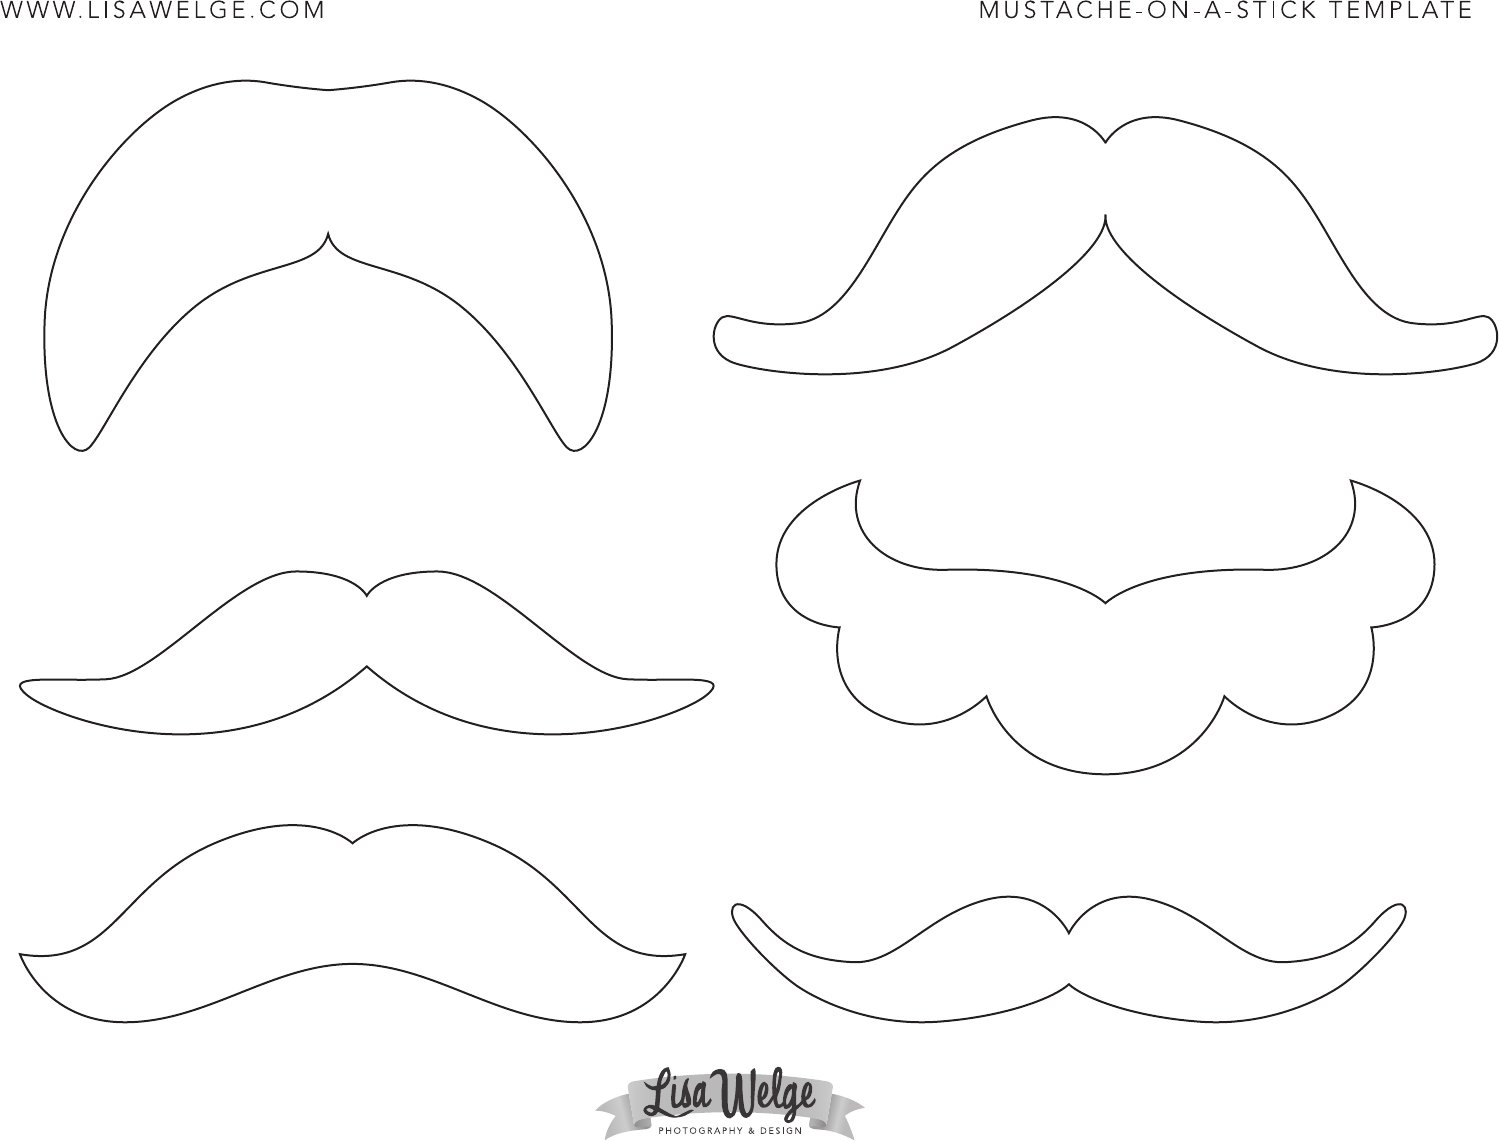 Free Mustache Template - PDF | 255KB | 2 Page(s)